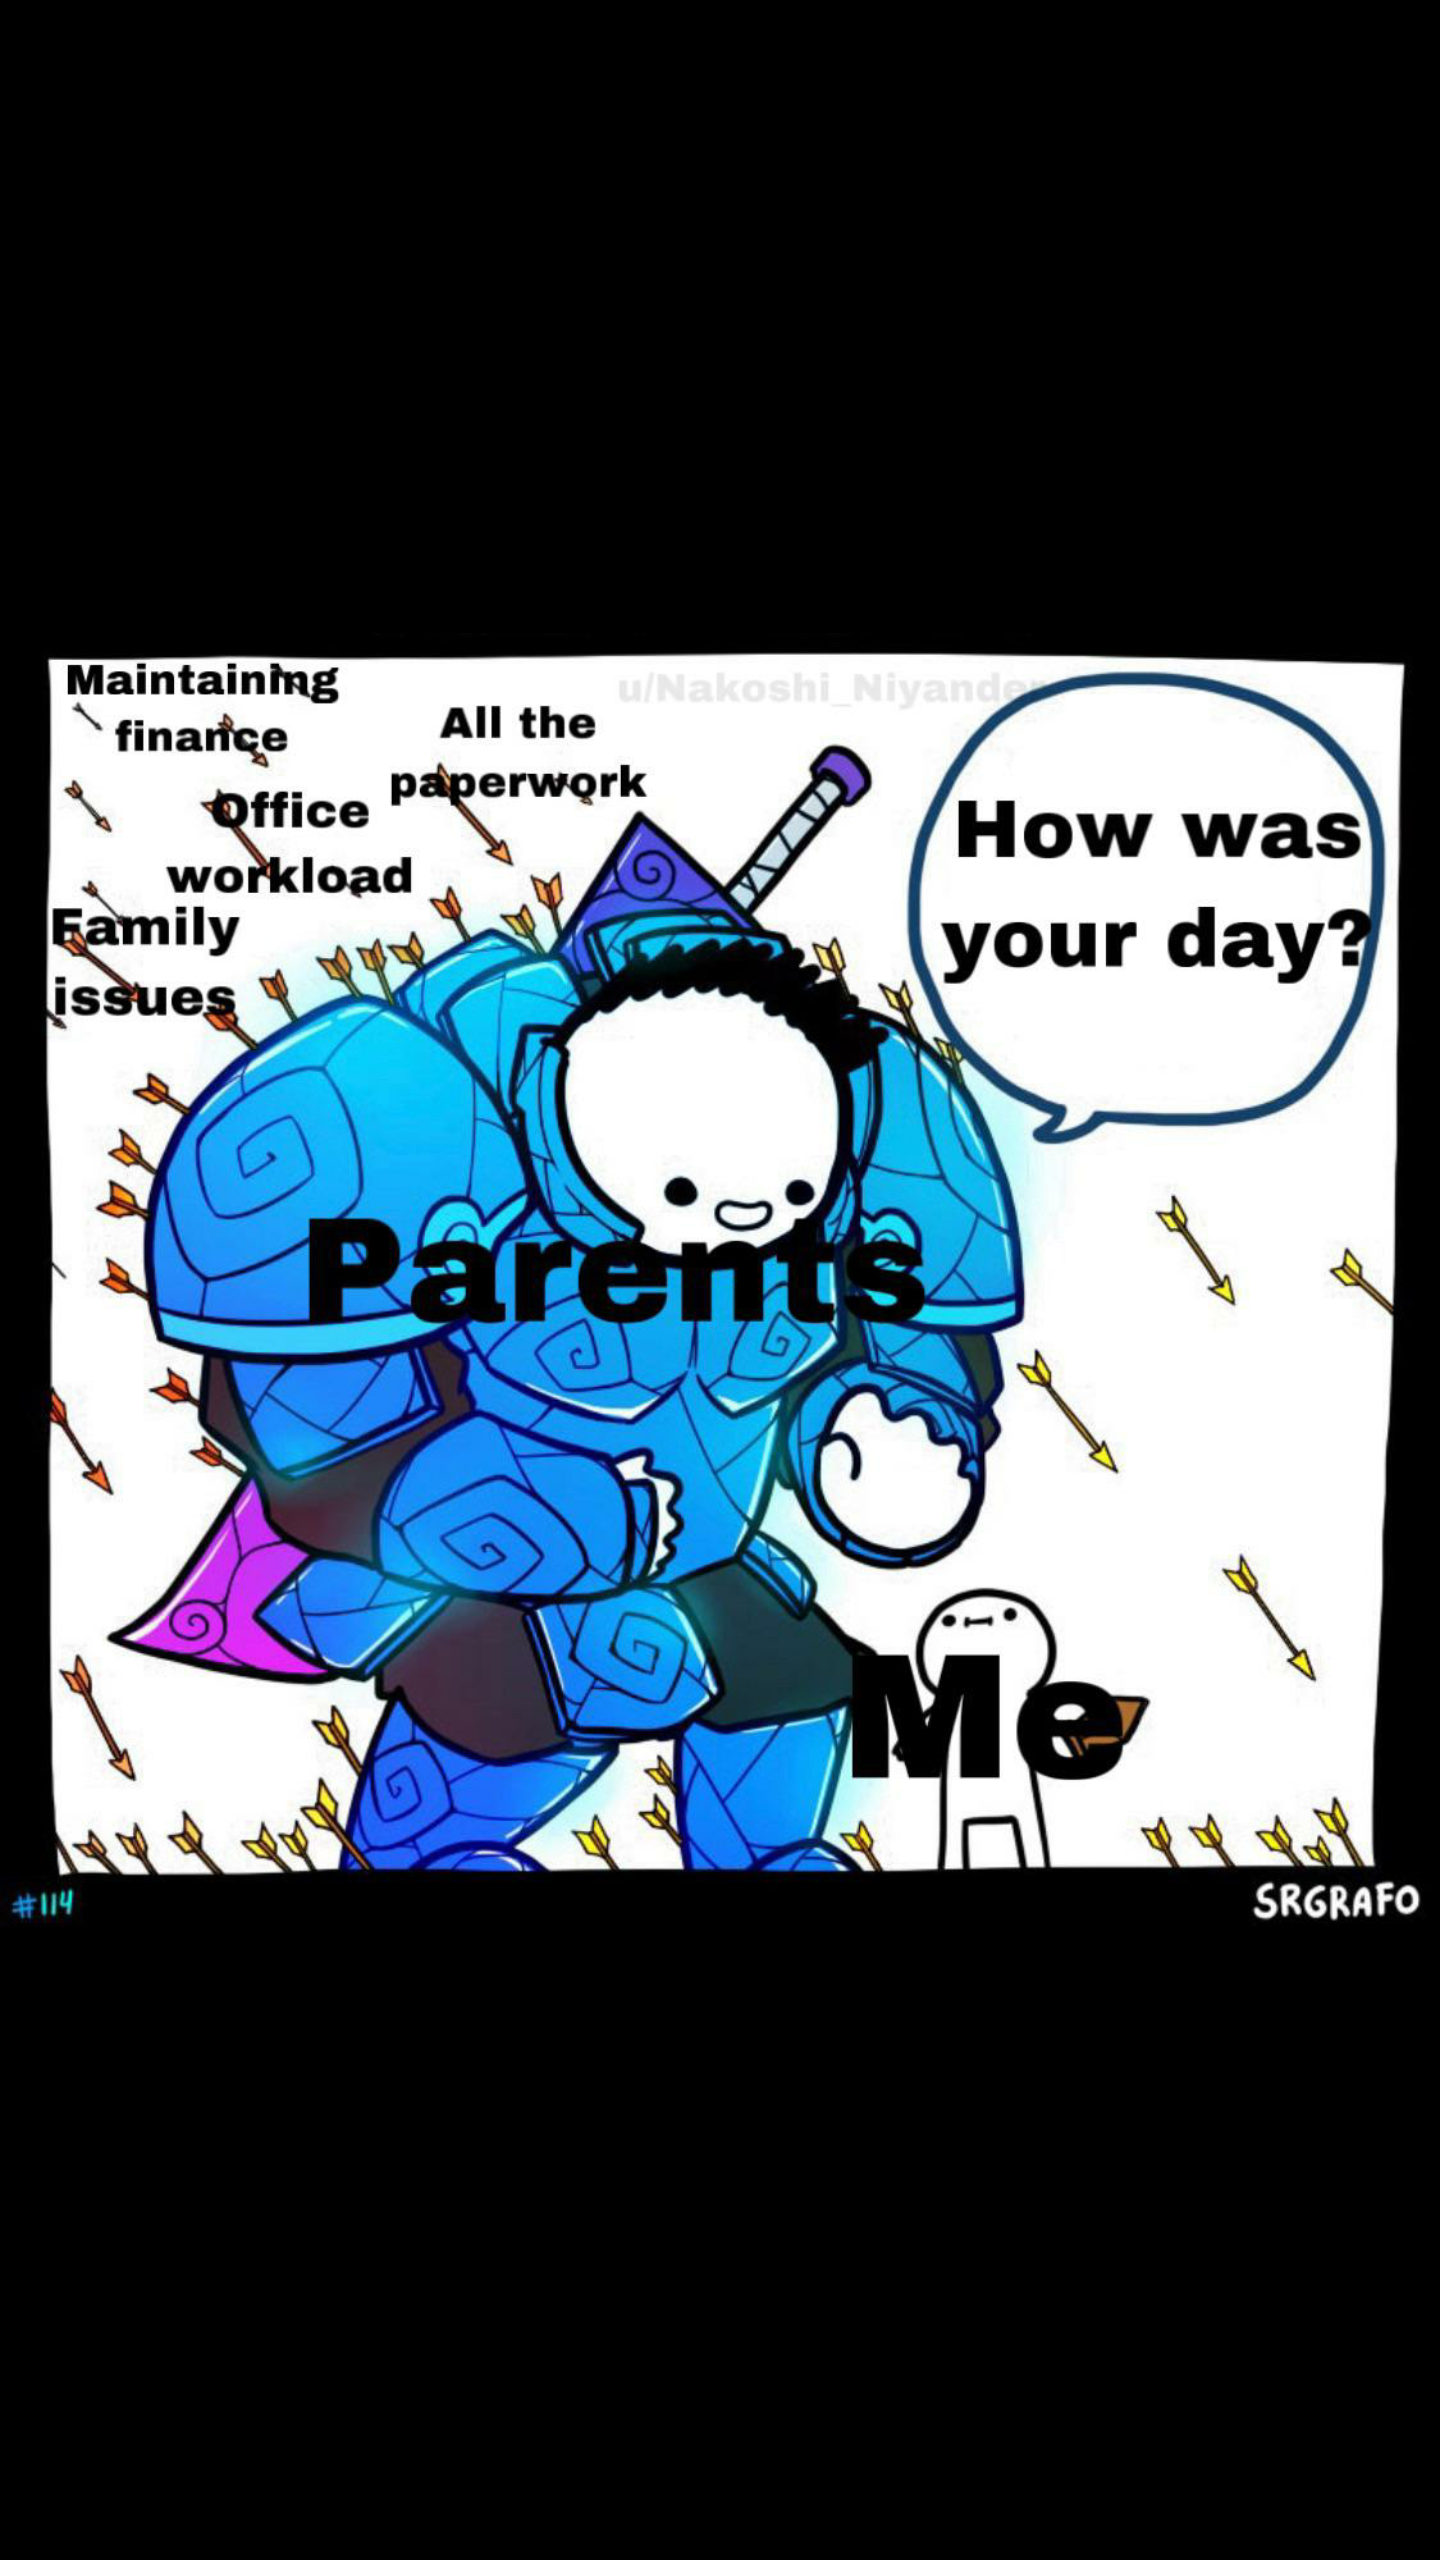 Thanks to all the parents